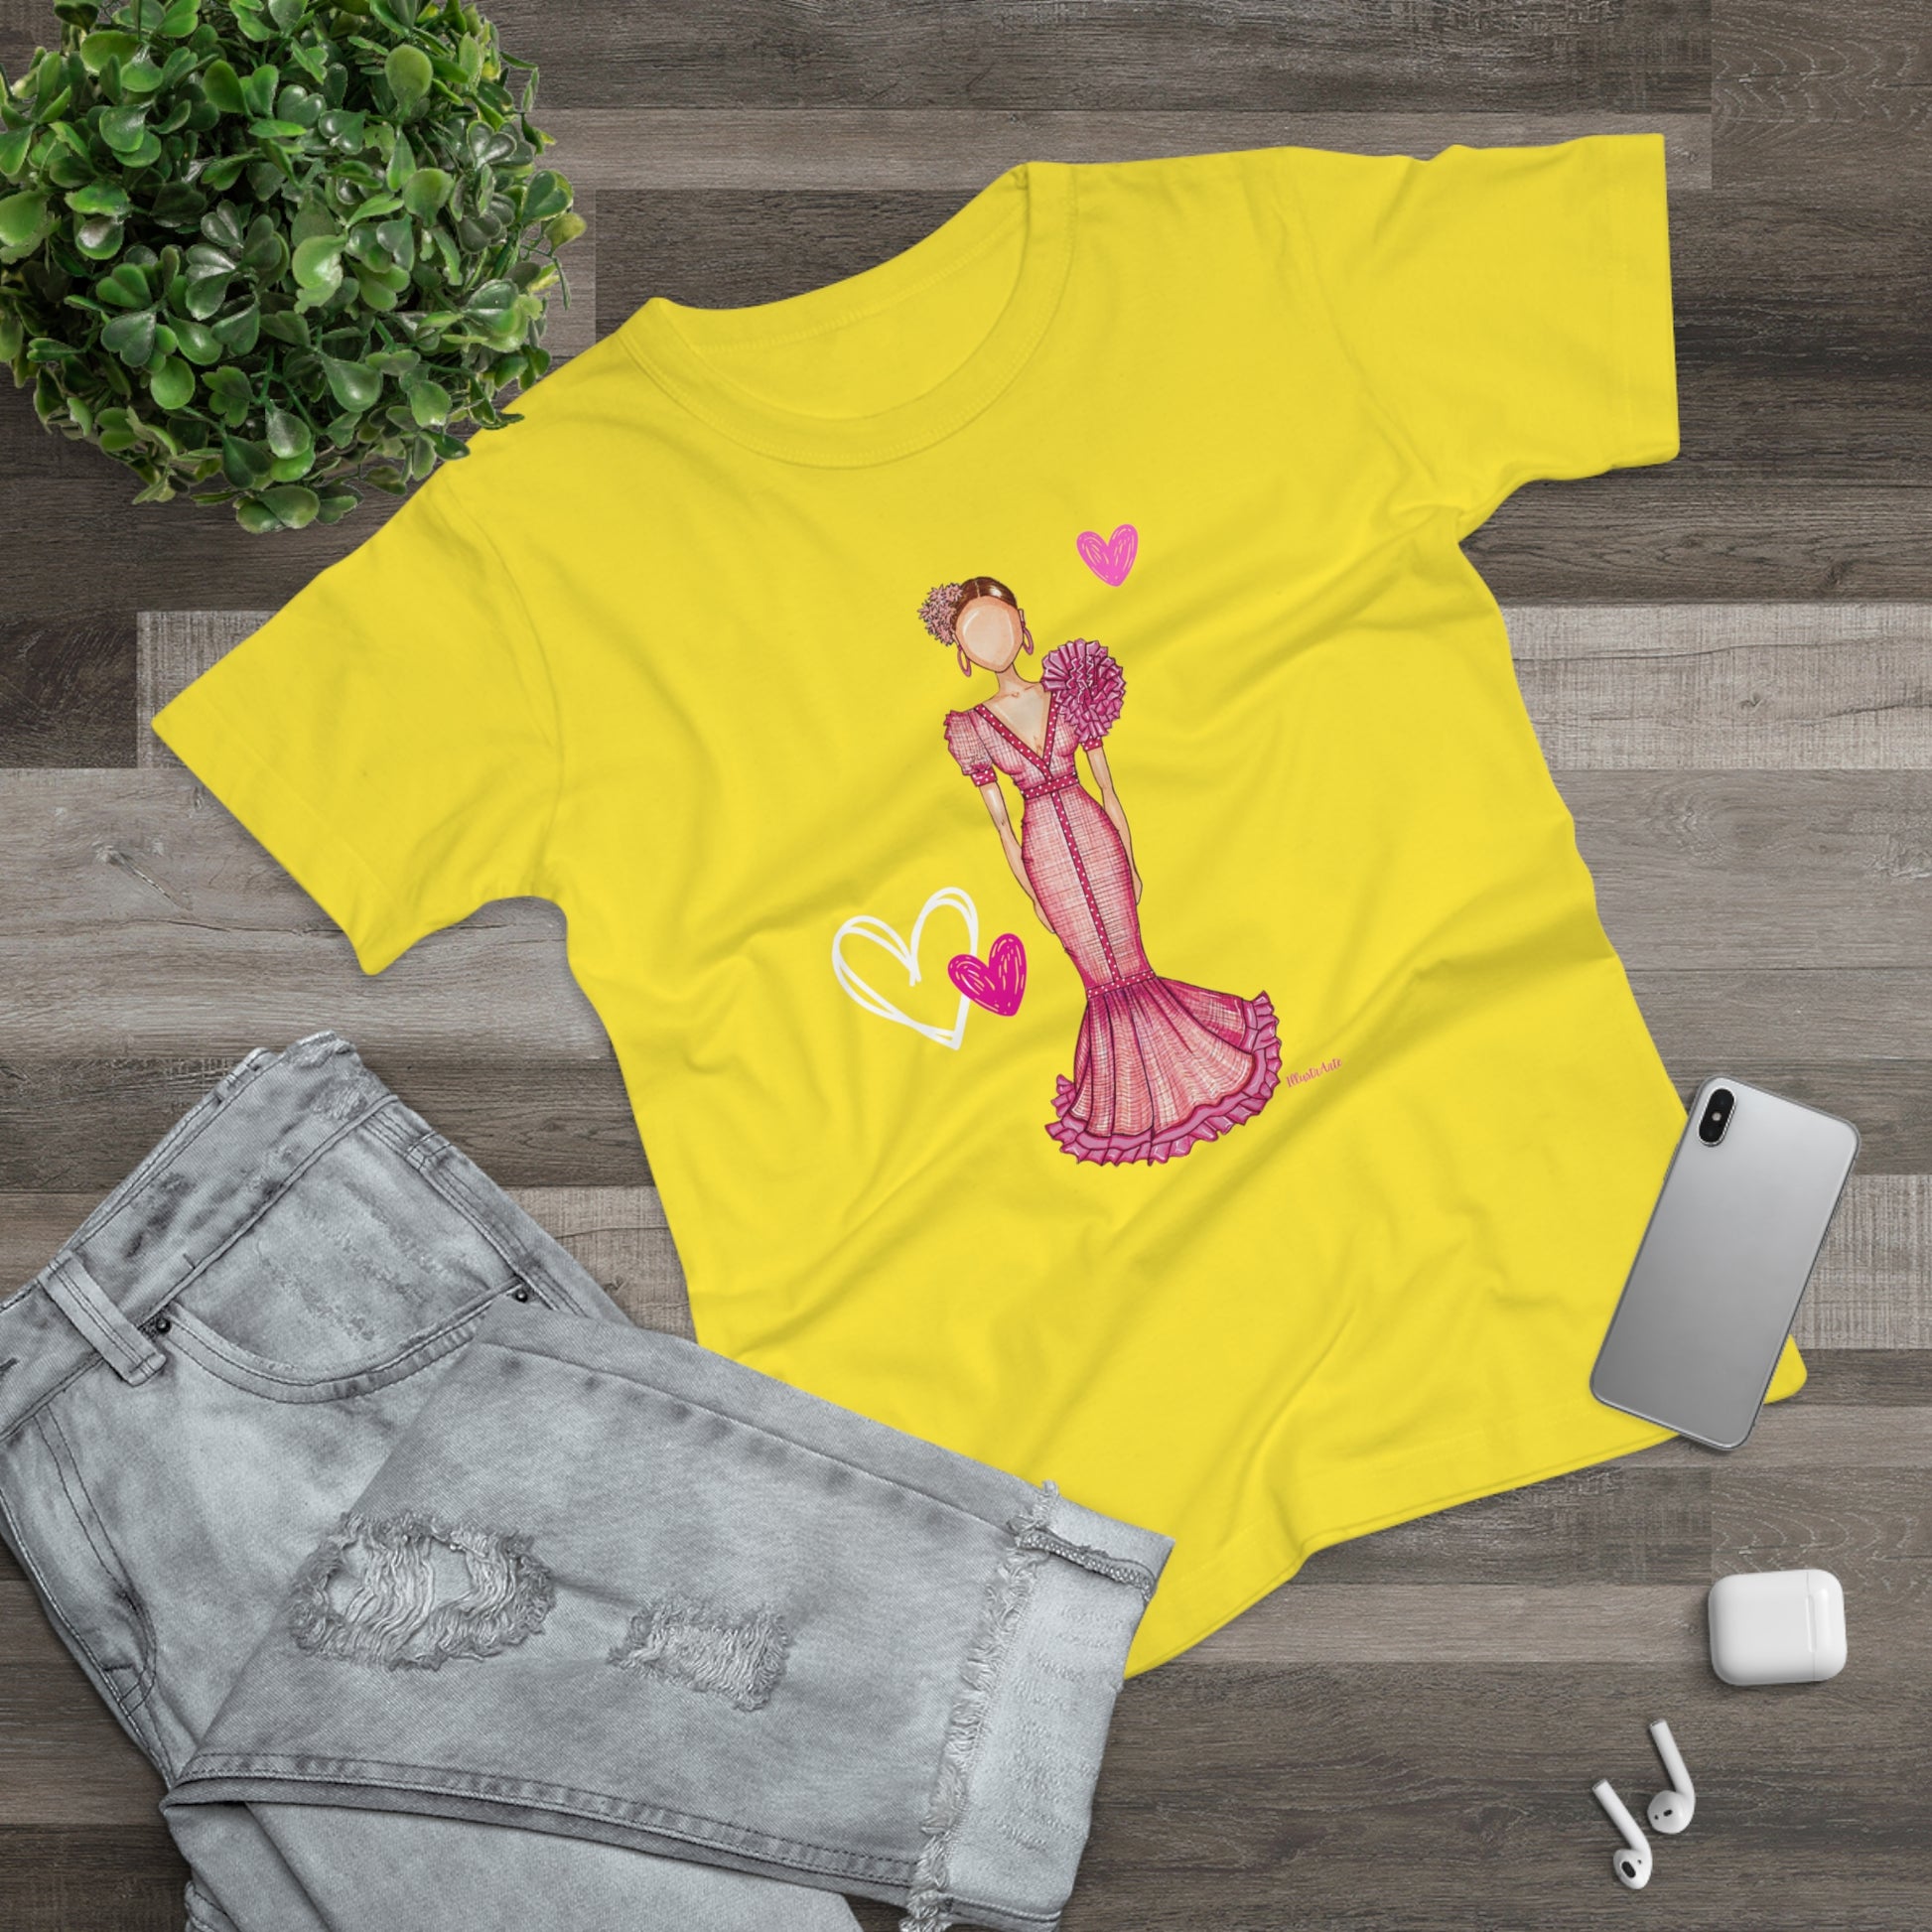 a yellow t - shirt with a picture of a woman in a pink dress